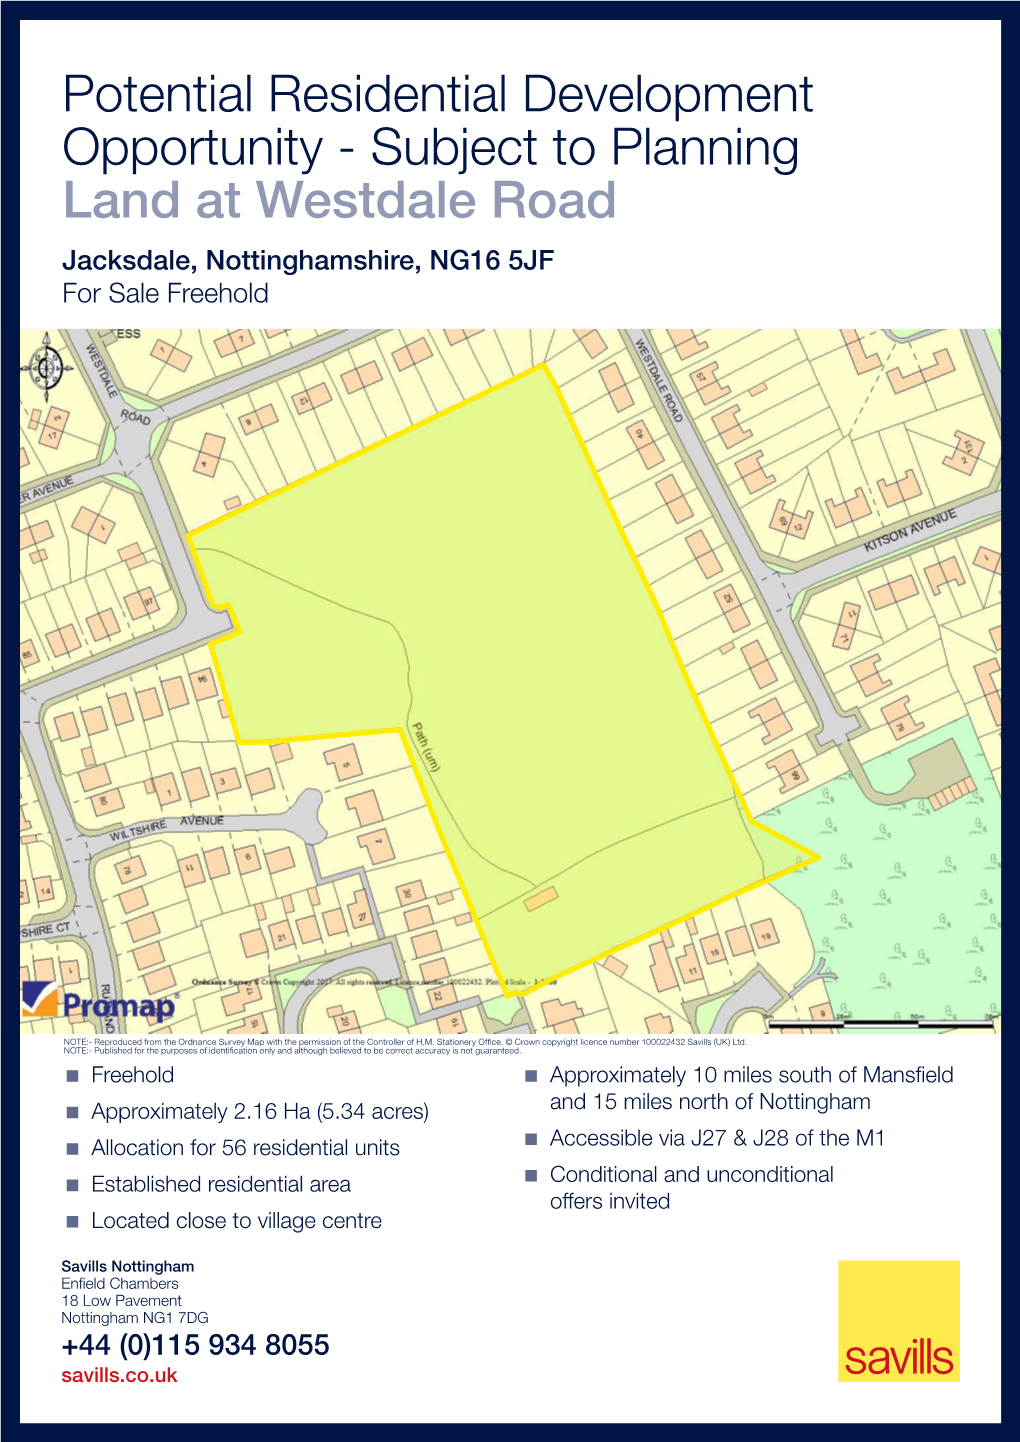 Subject to Planning Land at Westdale Road Jacksdale, Nottinghamshire, NG16 5JF for Sale Freehold